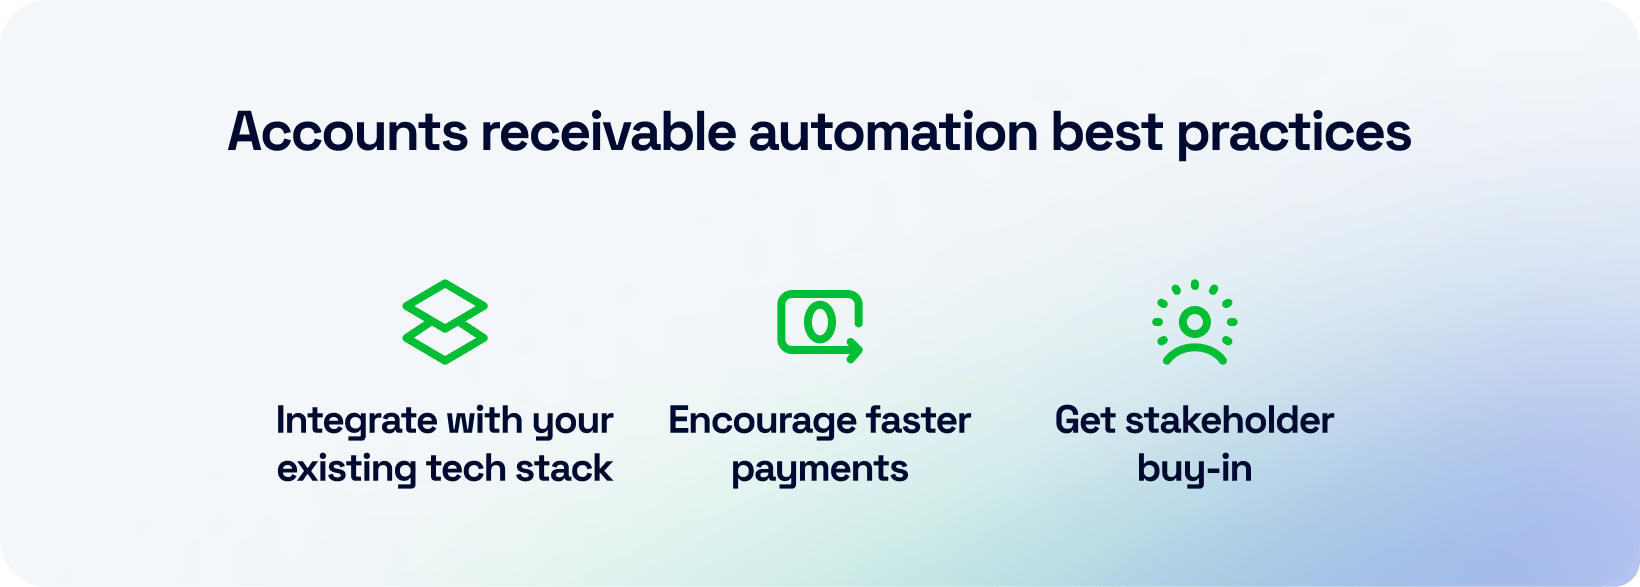 AR automation best practices: Integrate with your existing tech staack, encourage faster payments, get stakeholder buy-in